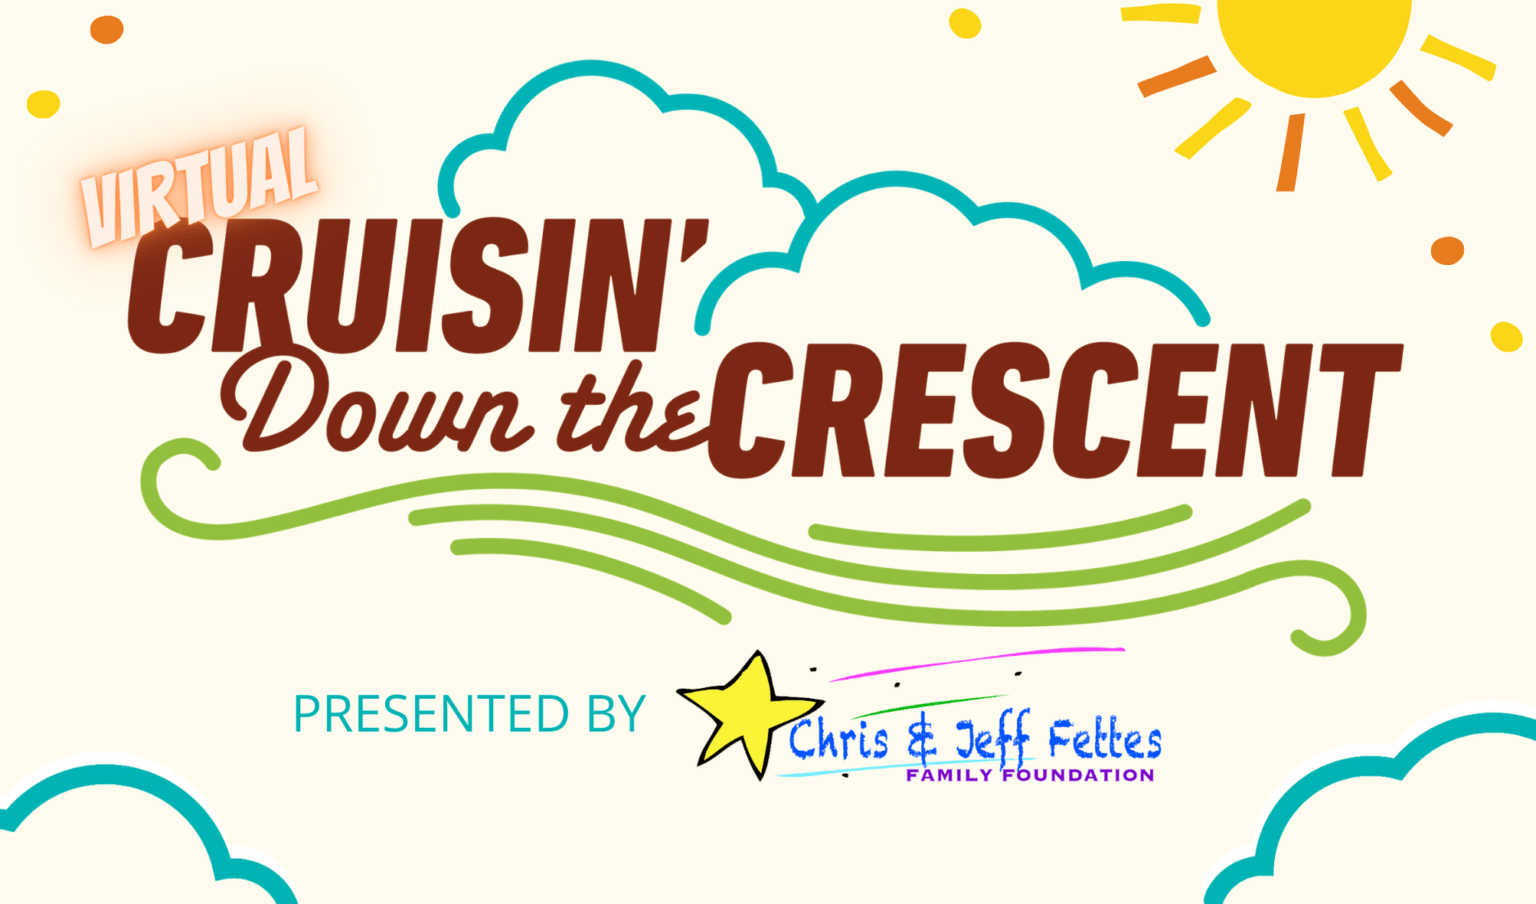 virtual cruisin down the crescent. presented by Chris and Jeff Fettes family foundation